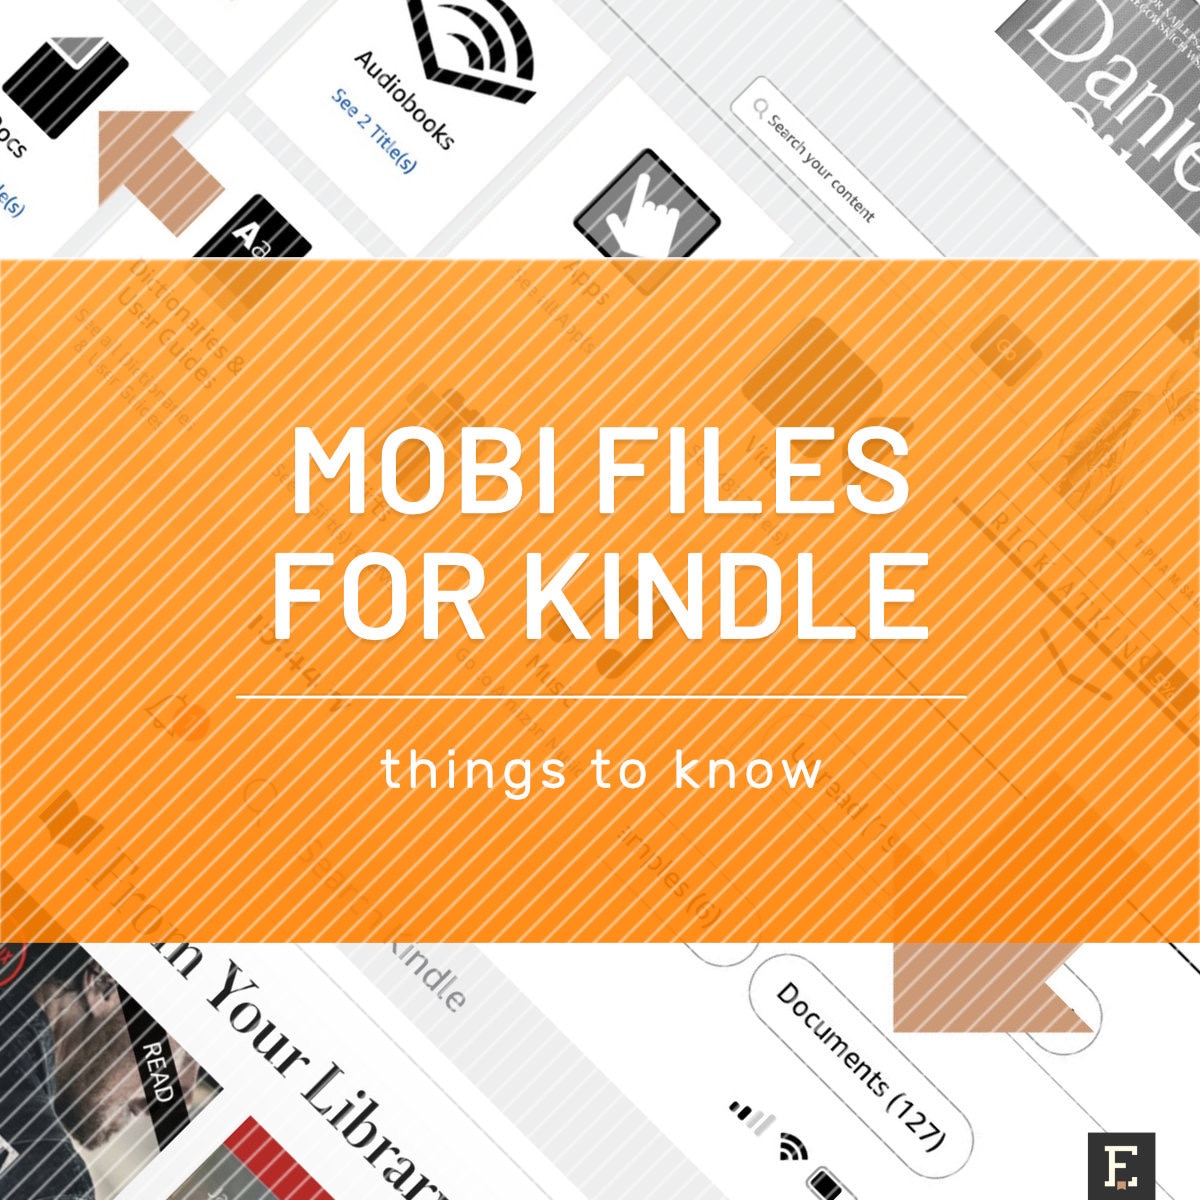 Mobi files for Kindle – things you should know